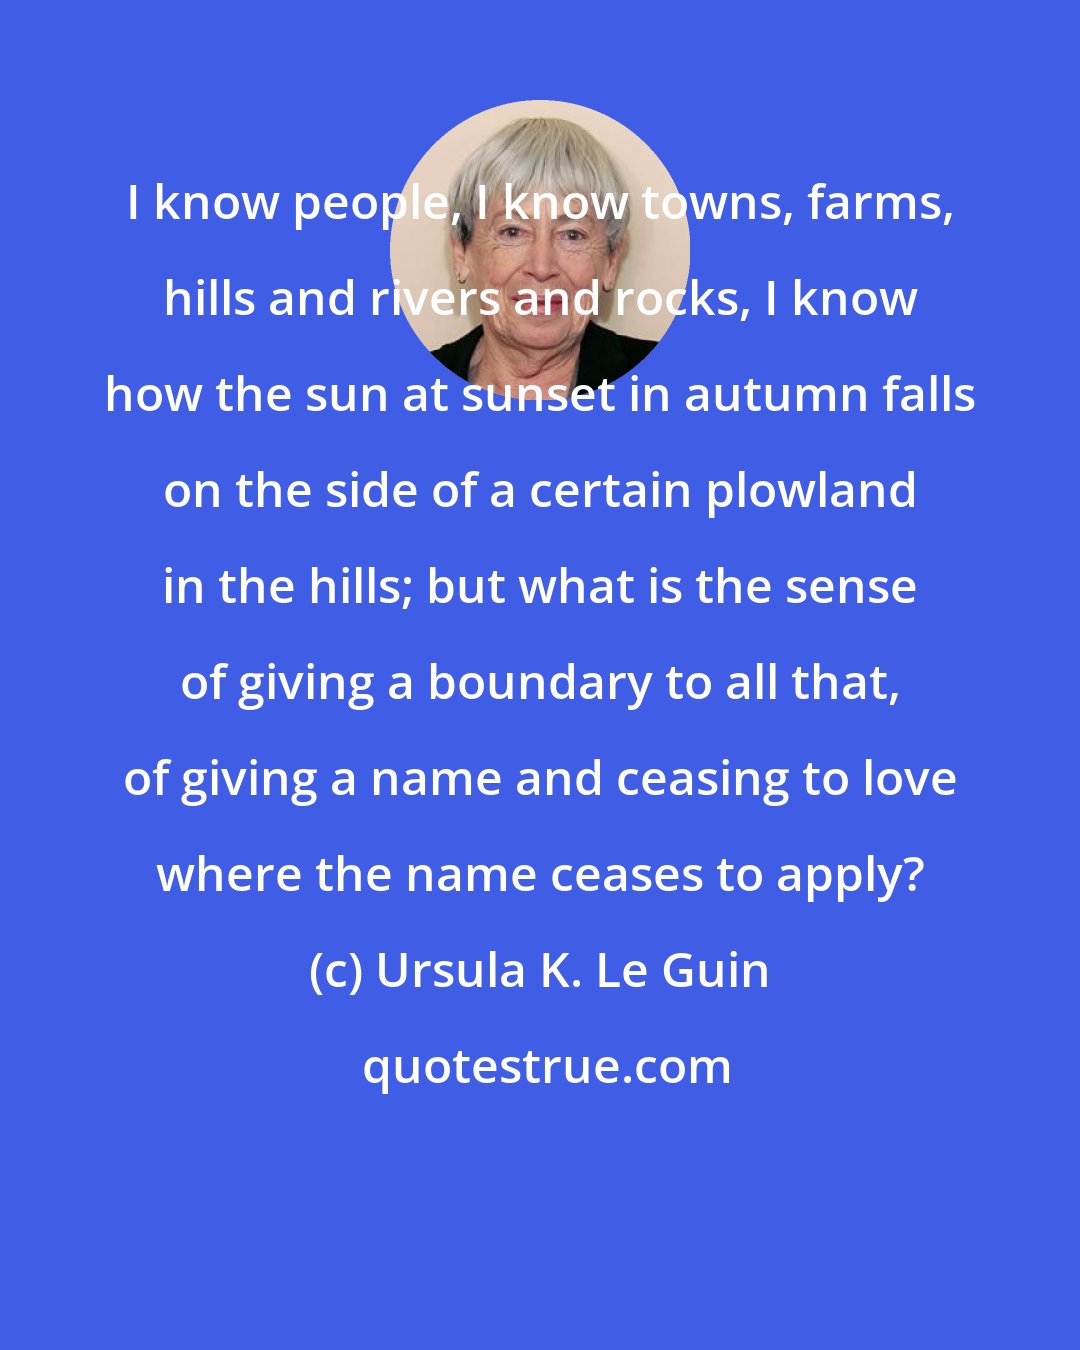 Ursula K. Le Guin: I know people, I know towns, farms, hills and rivers and rocks, I know how the sun at sunset in autumn falls on the side of a certain plowland in the hills; but what is the sense of giving a boundary to all that, of giving a name and ceasing to love where the name ceases to apply?